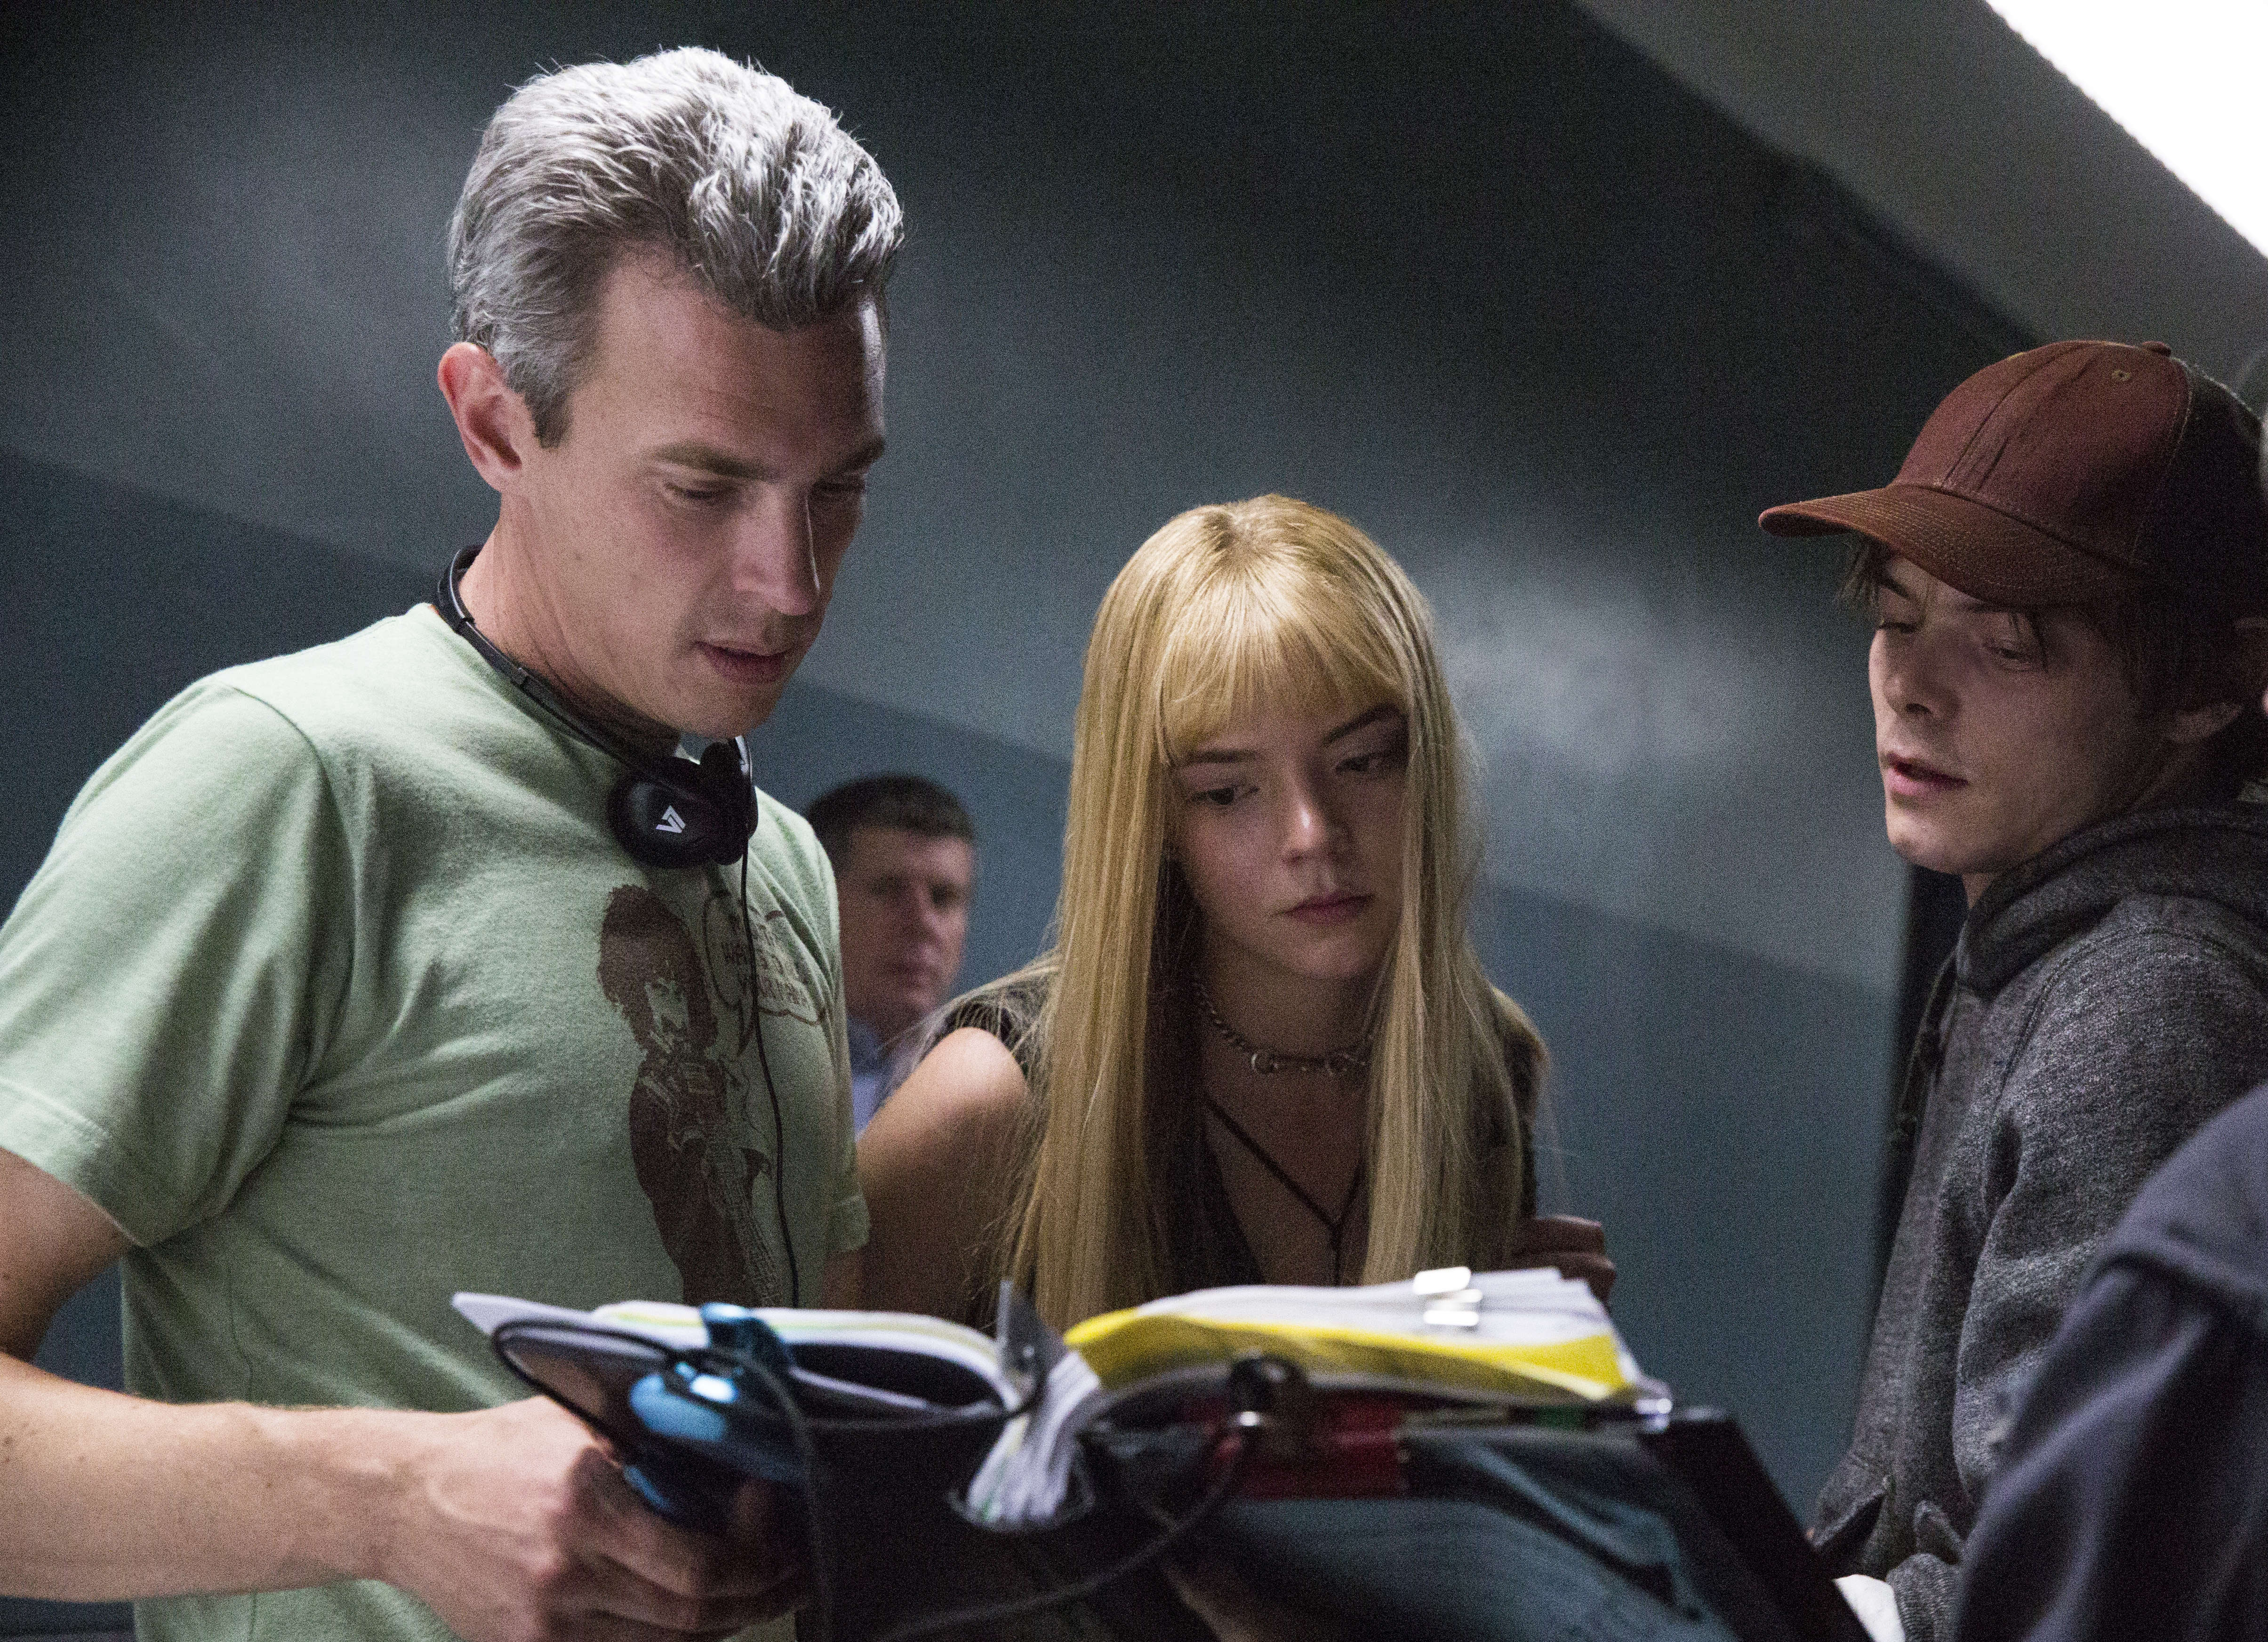 What makes The New Mutants worth the long wait? The director and cast weigh  in